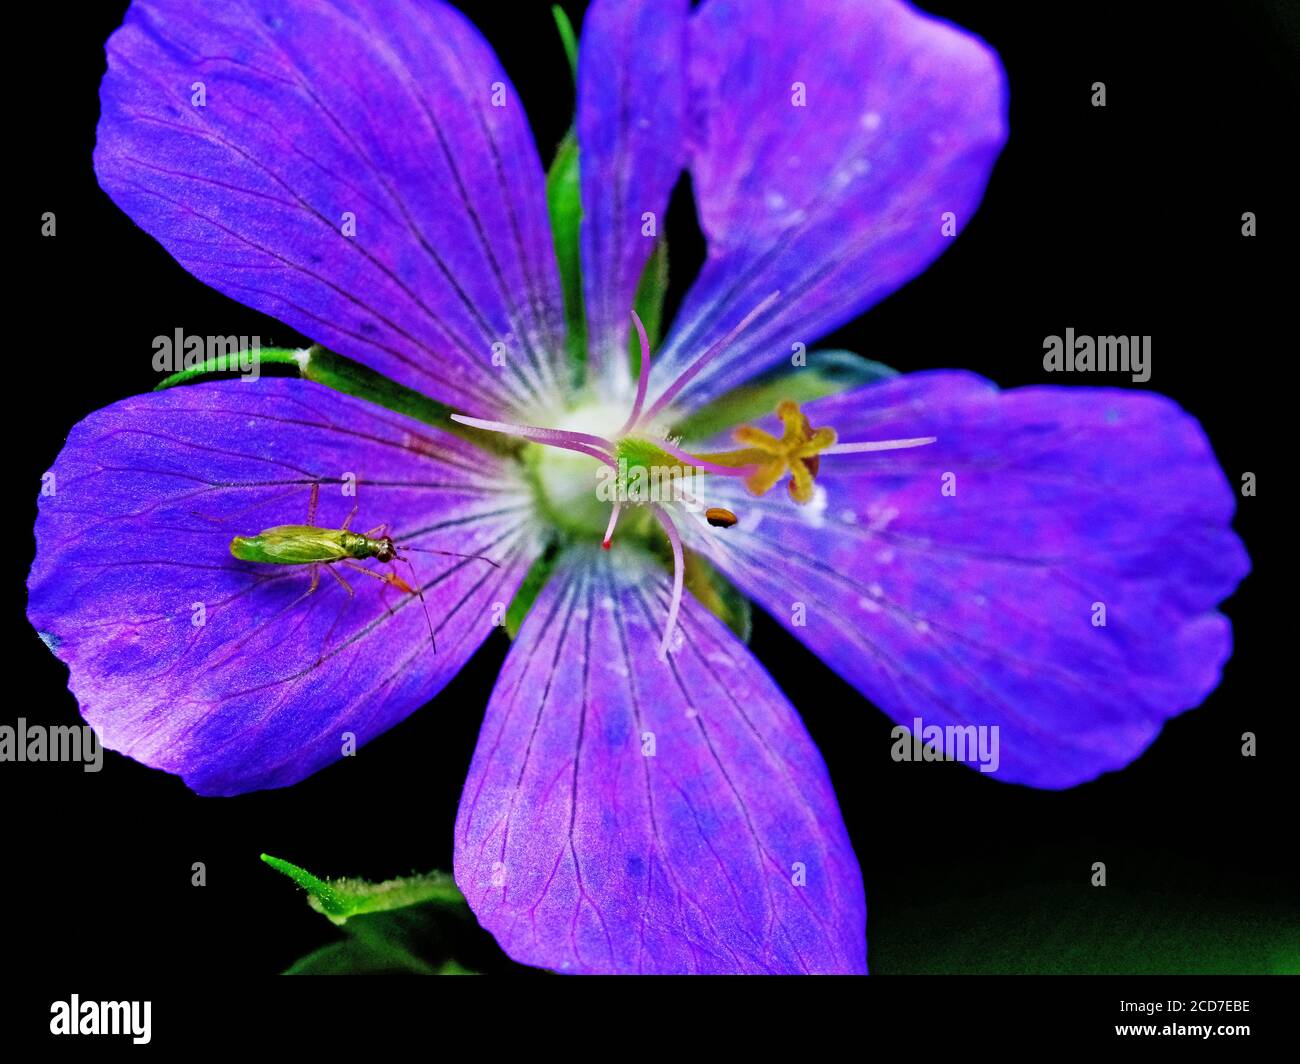 Green crane caddis fly resting on a deep blue 4 leafed flower against dark muted background Stock Photo